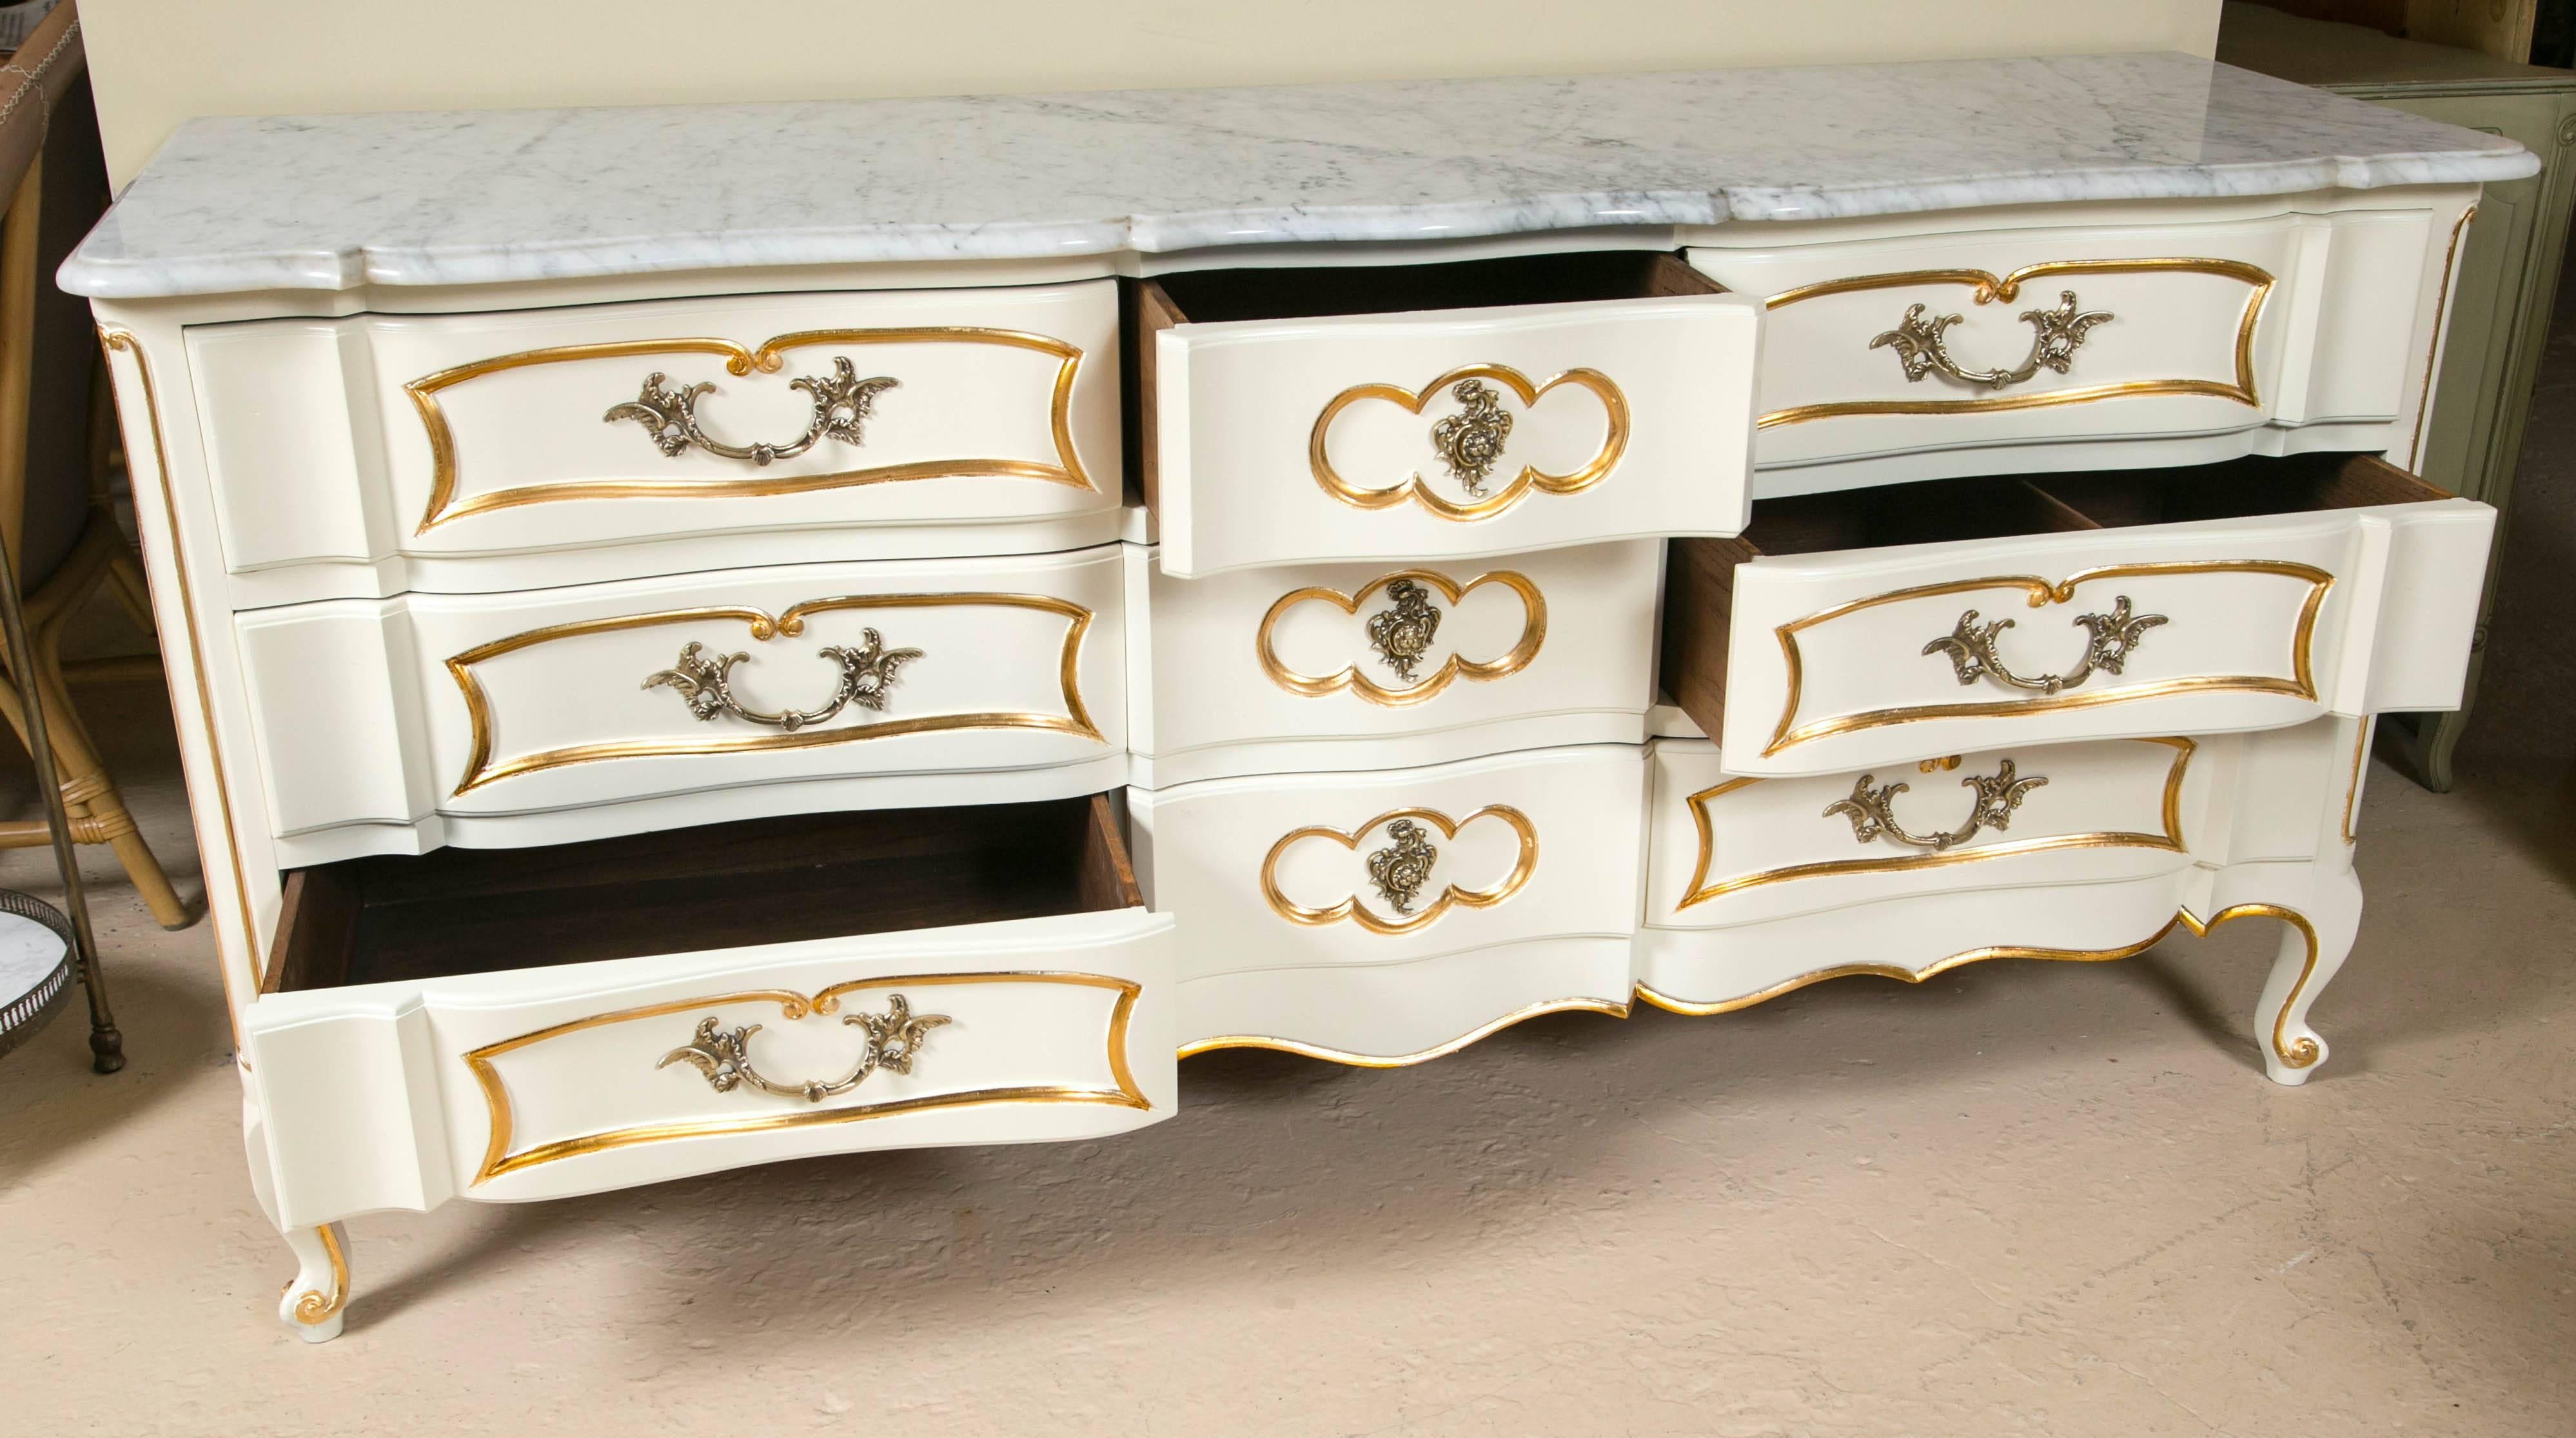 Hollywood Regency Louis XV Style Marble Top Painted and Gilt Decorated Dresser Commode Nine Drawer